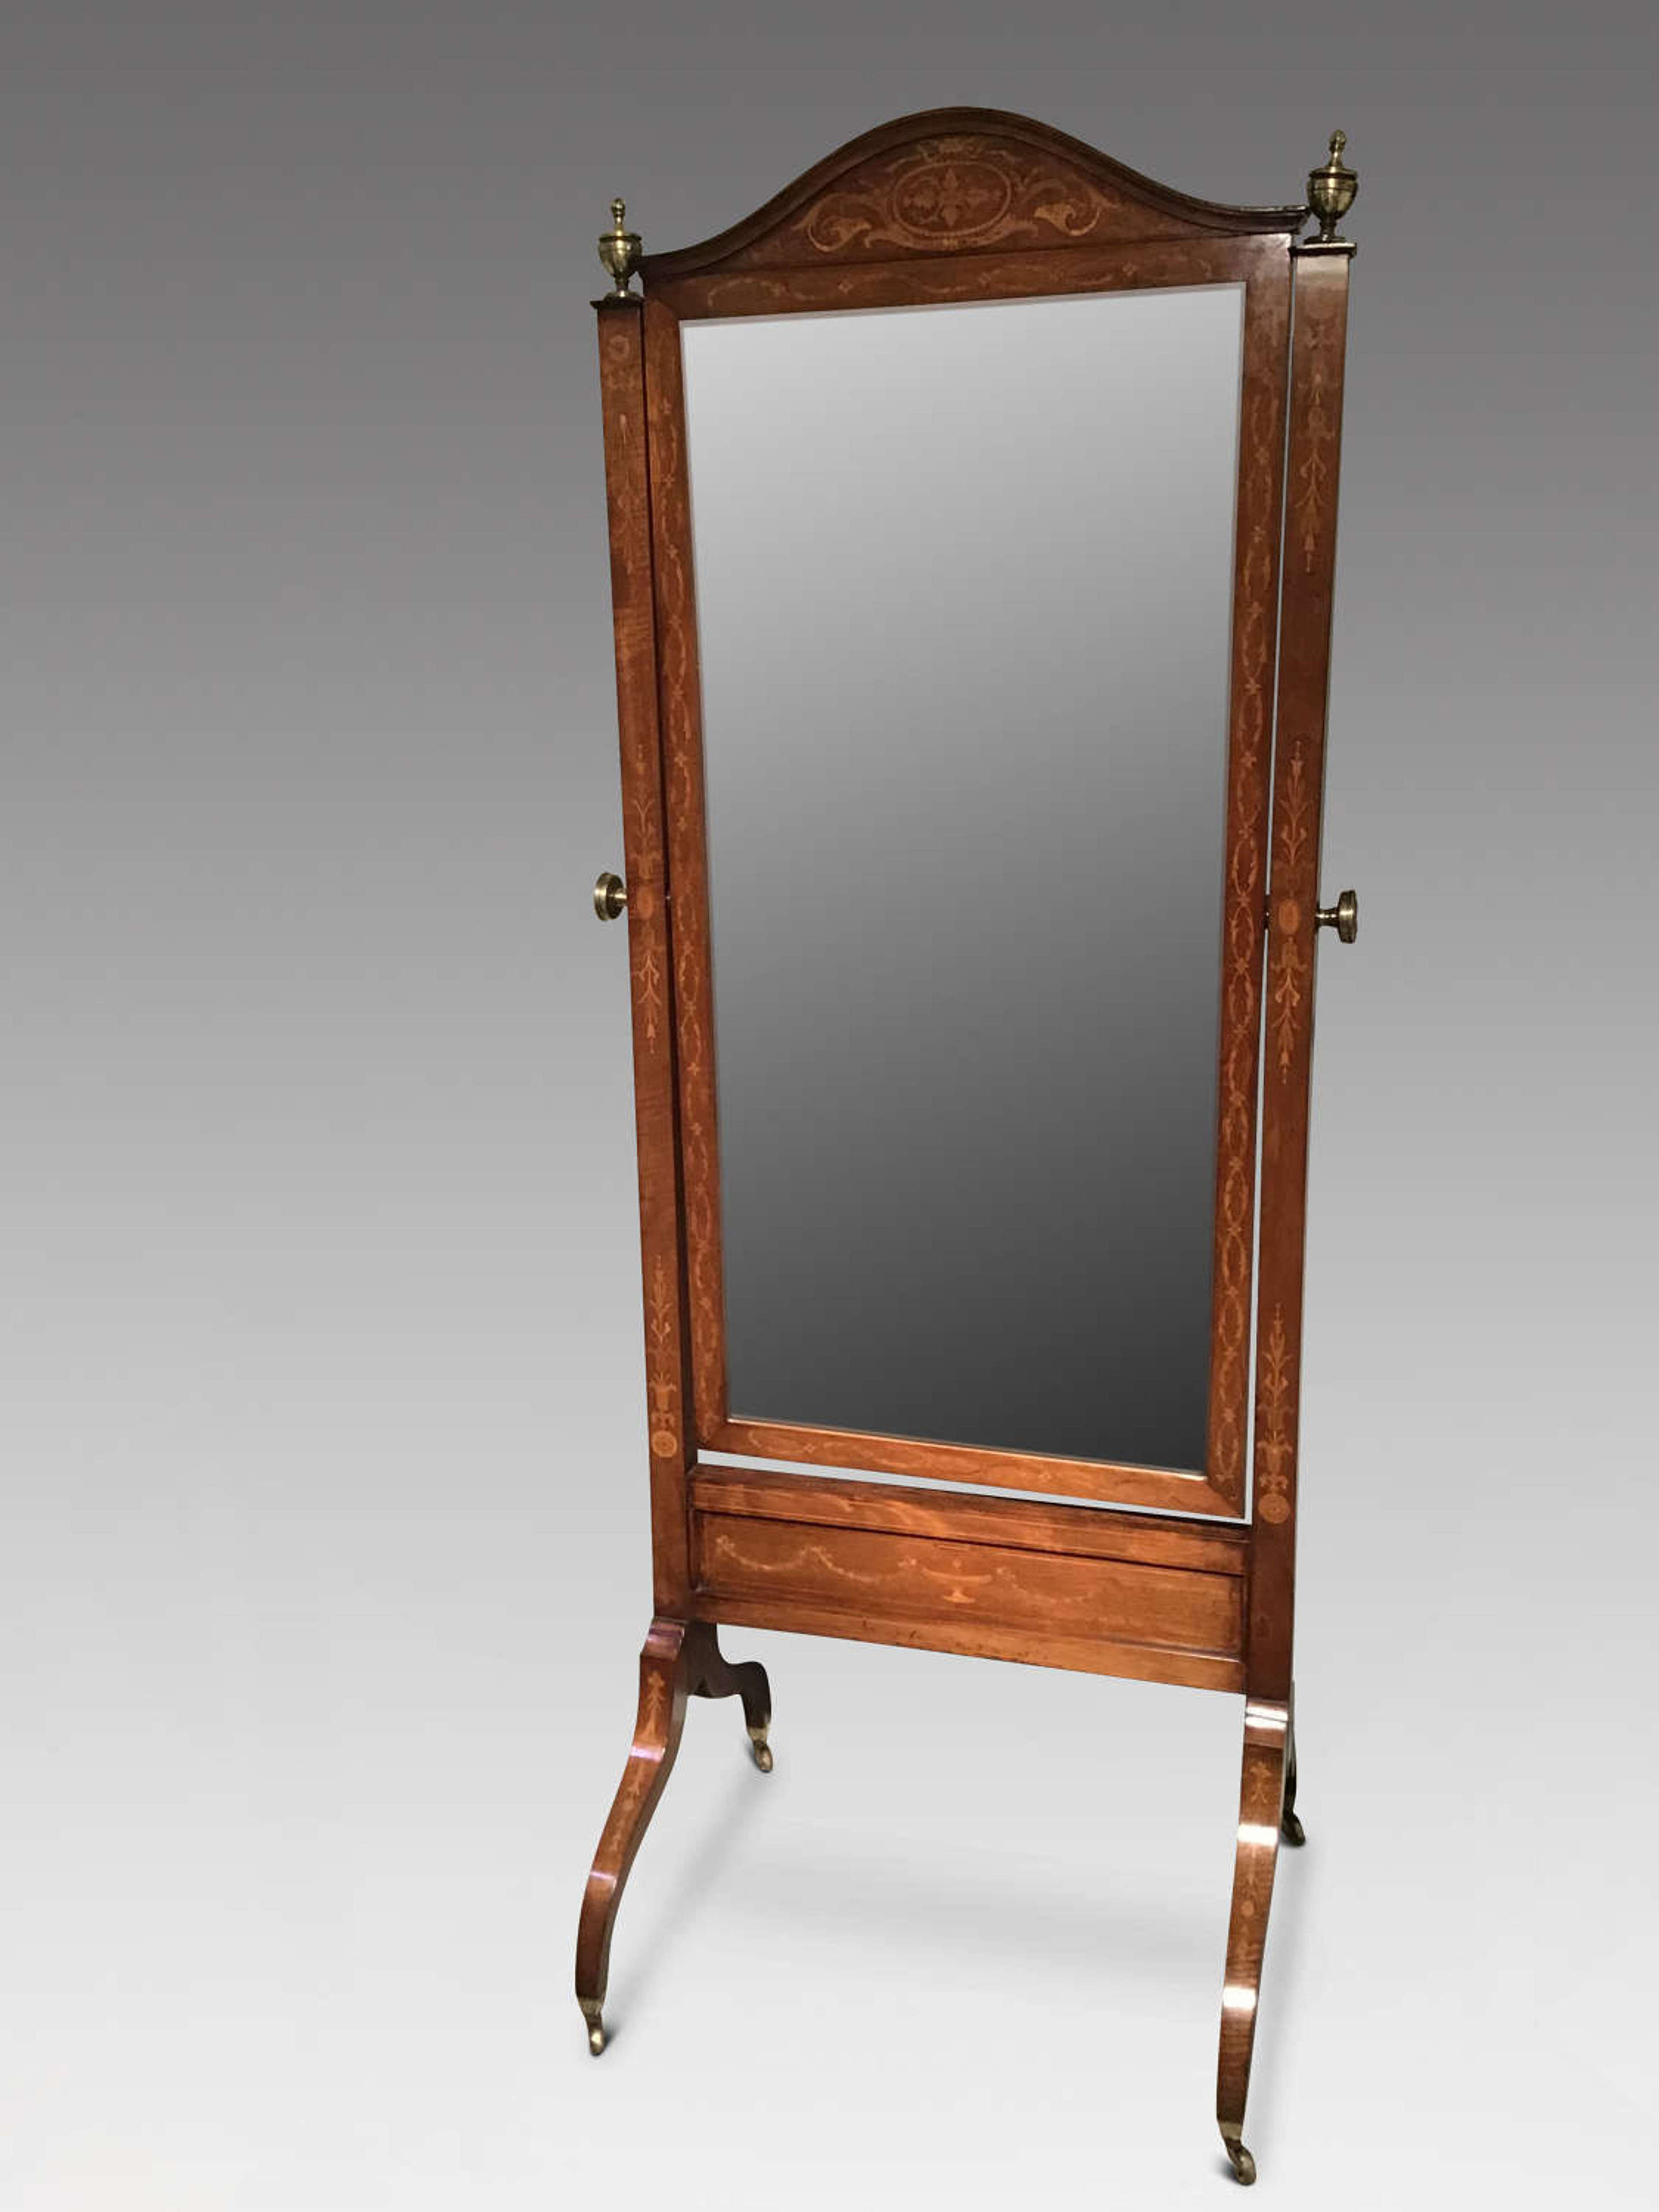 Antique Mahogany Cheval Mirror In, Small Antique Standing Mirror